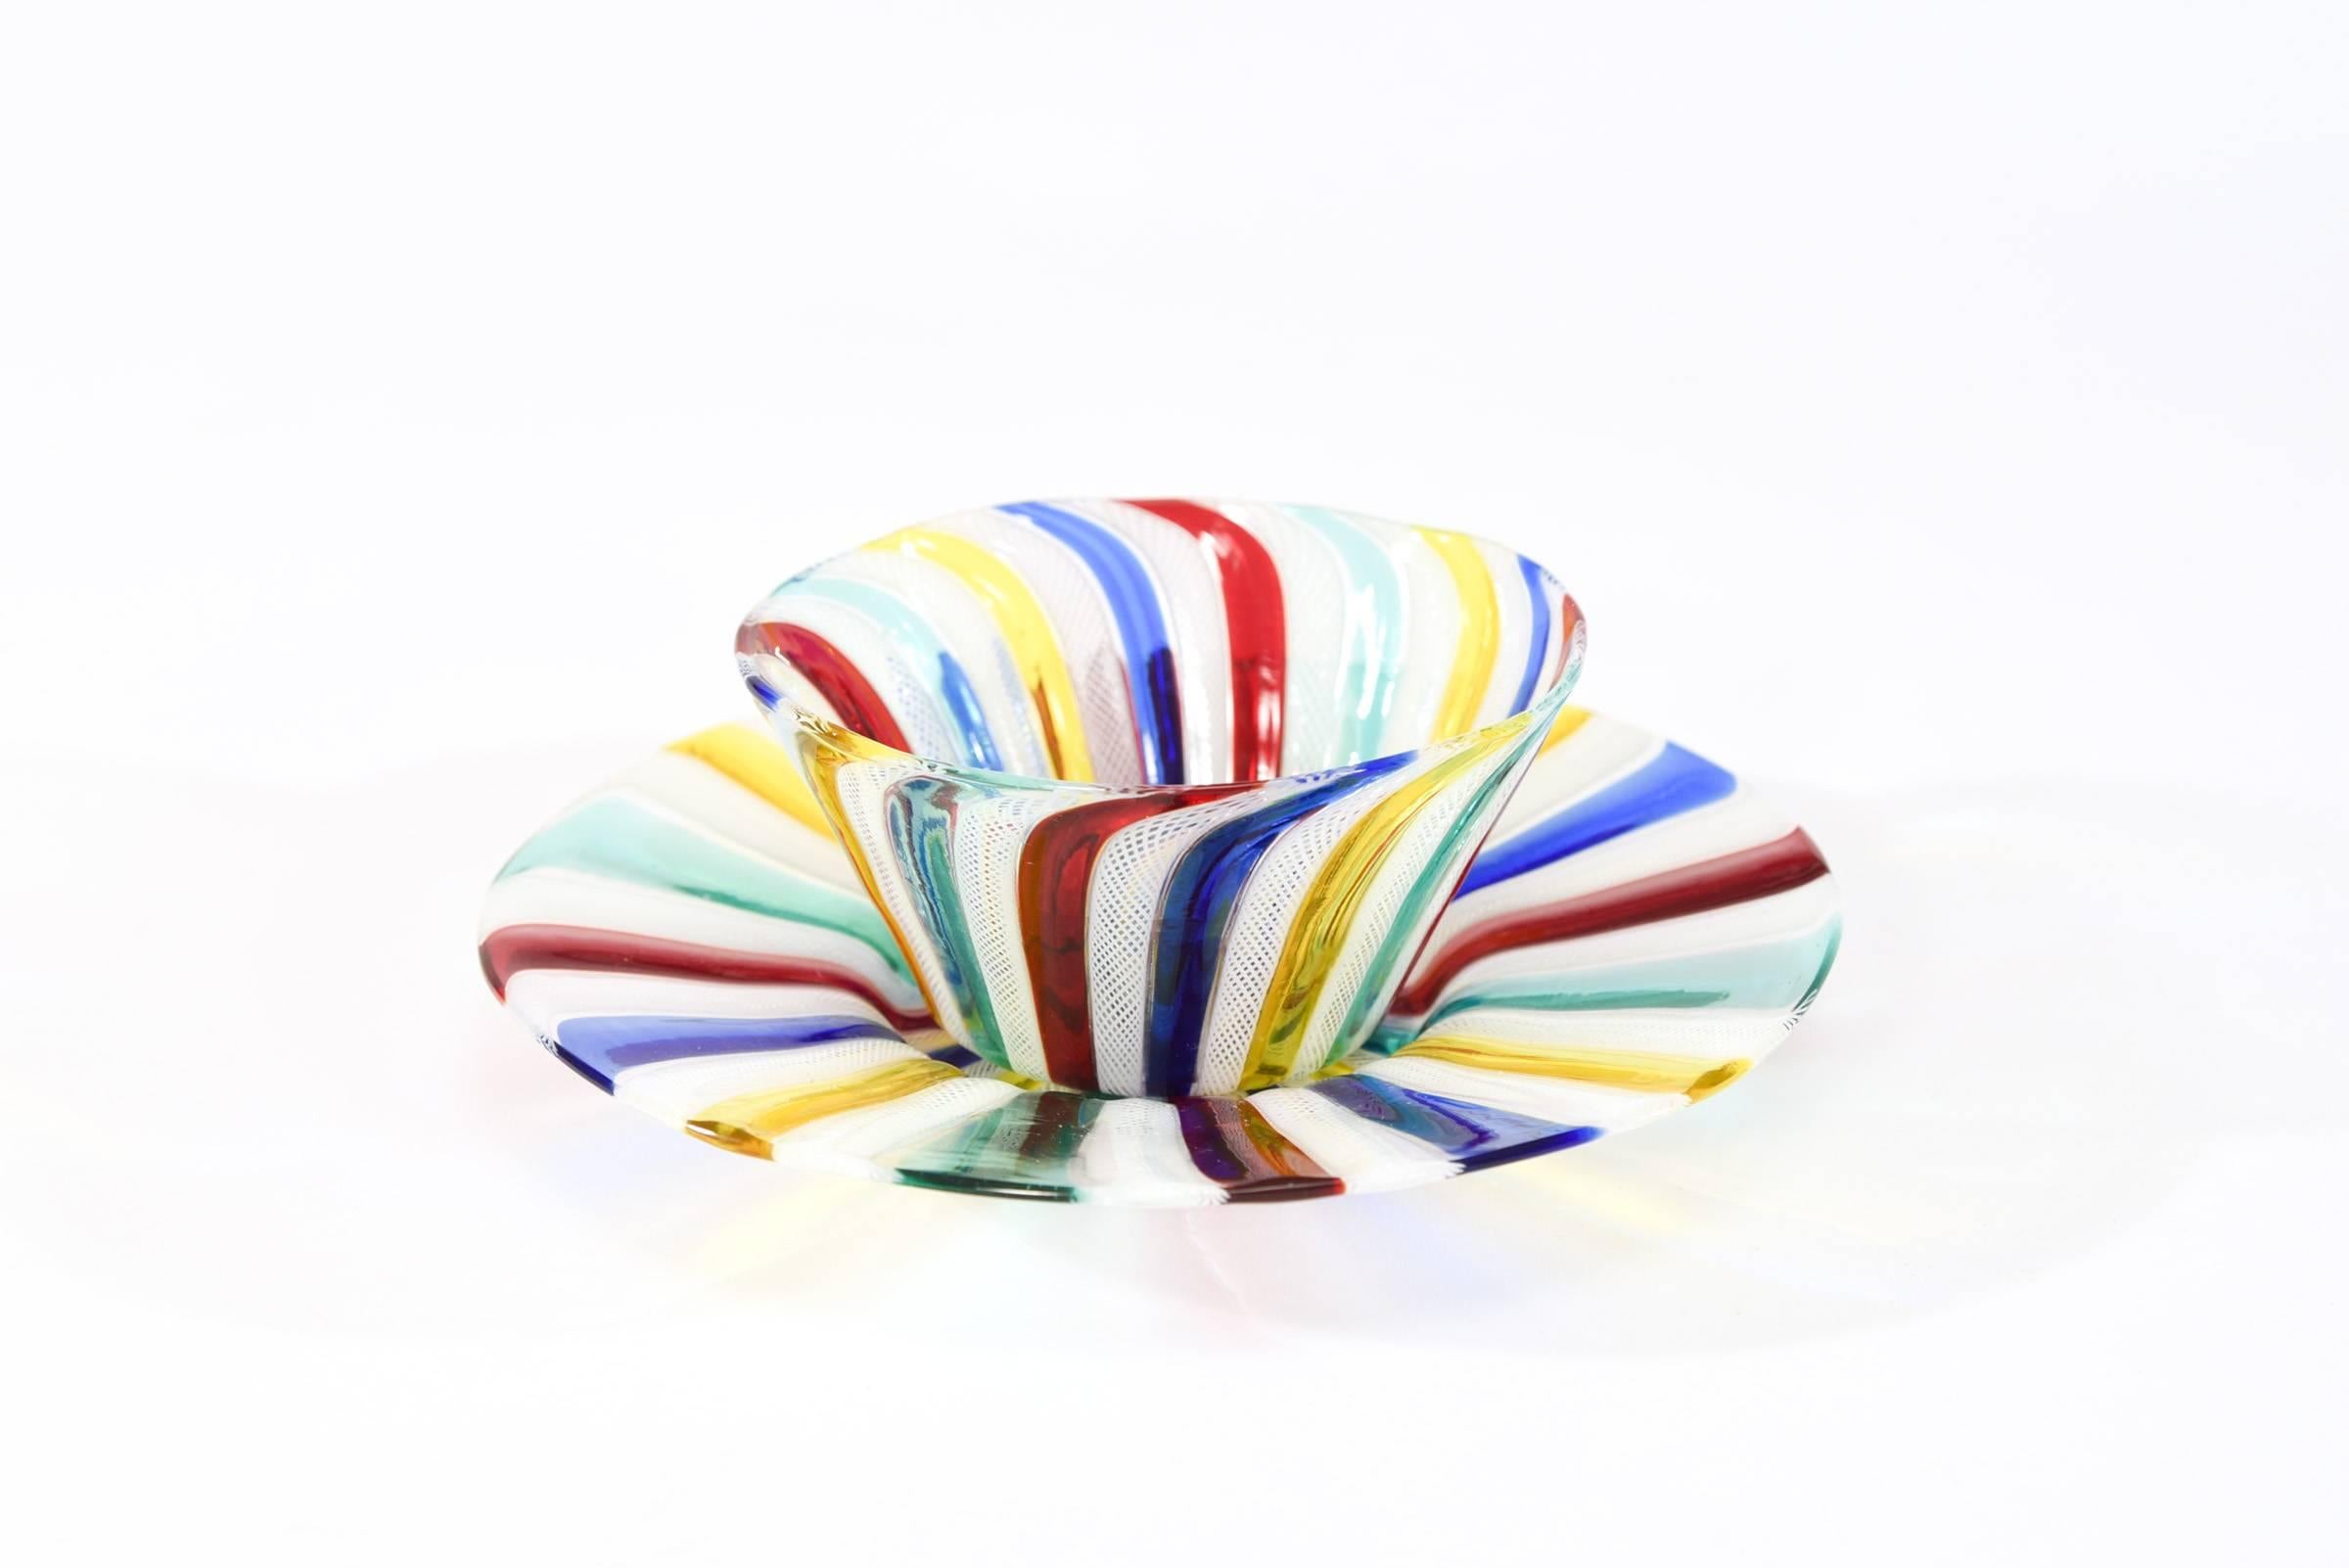 This set of 8 hand blown bowls and matching under plates were most likely made by Salviati and what sets them apart is the eye catching use of rich and dramatic primary colors. The brightly colored rods alternate with white latticino rods, creating